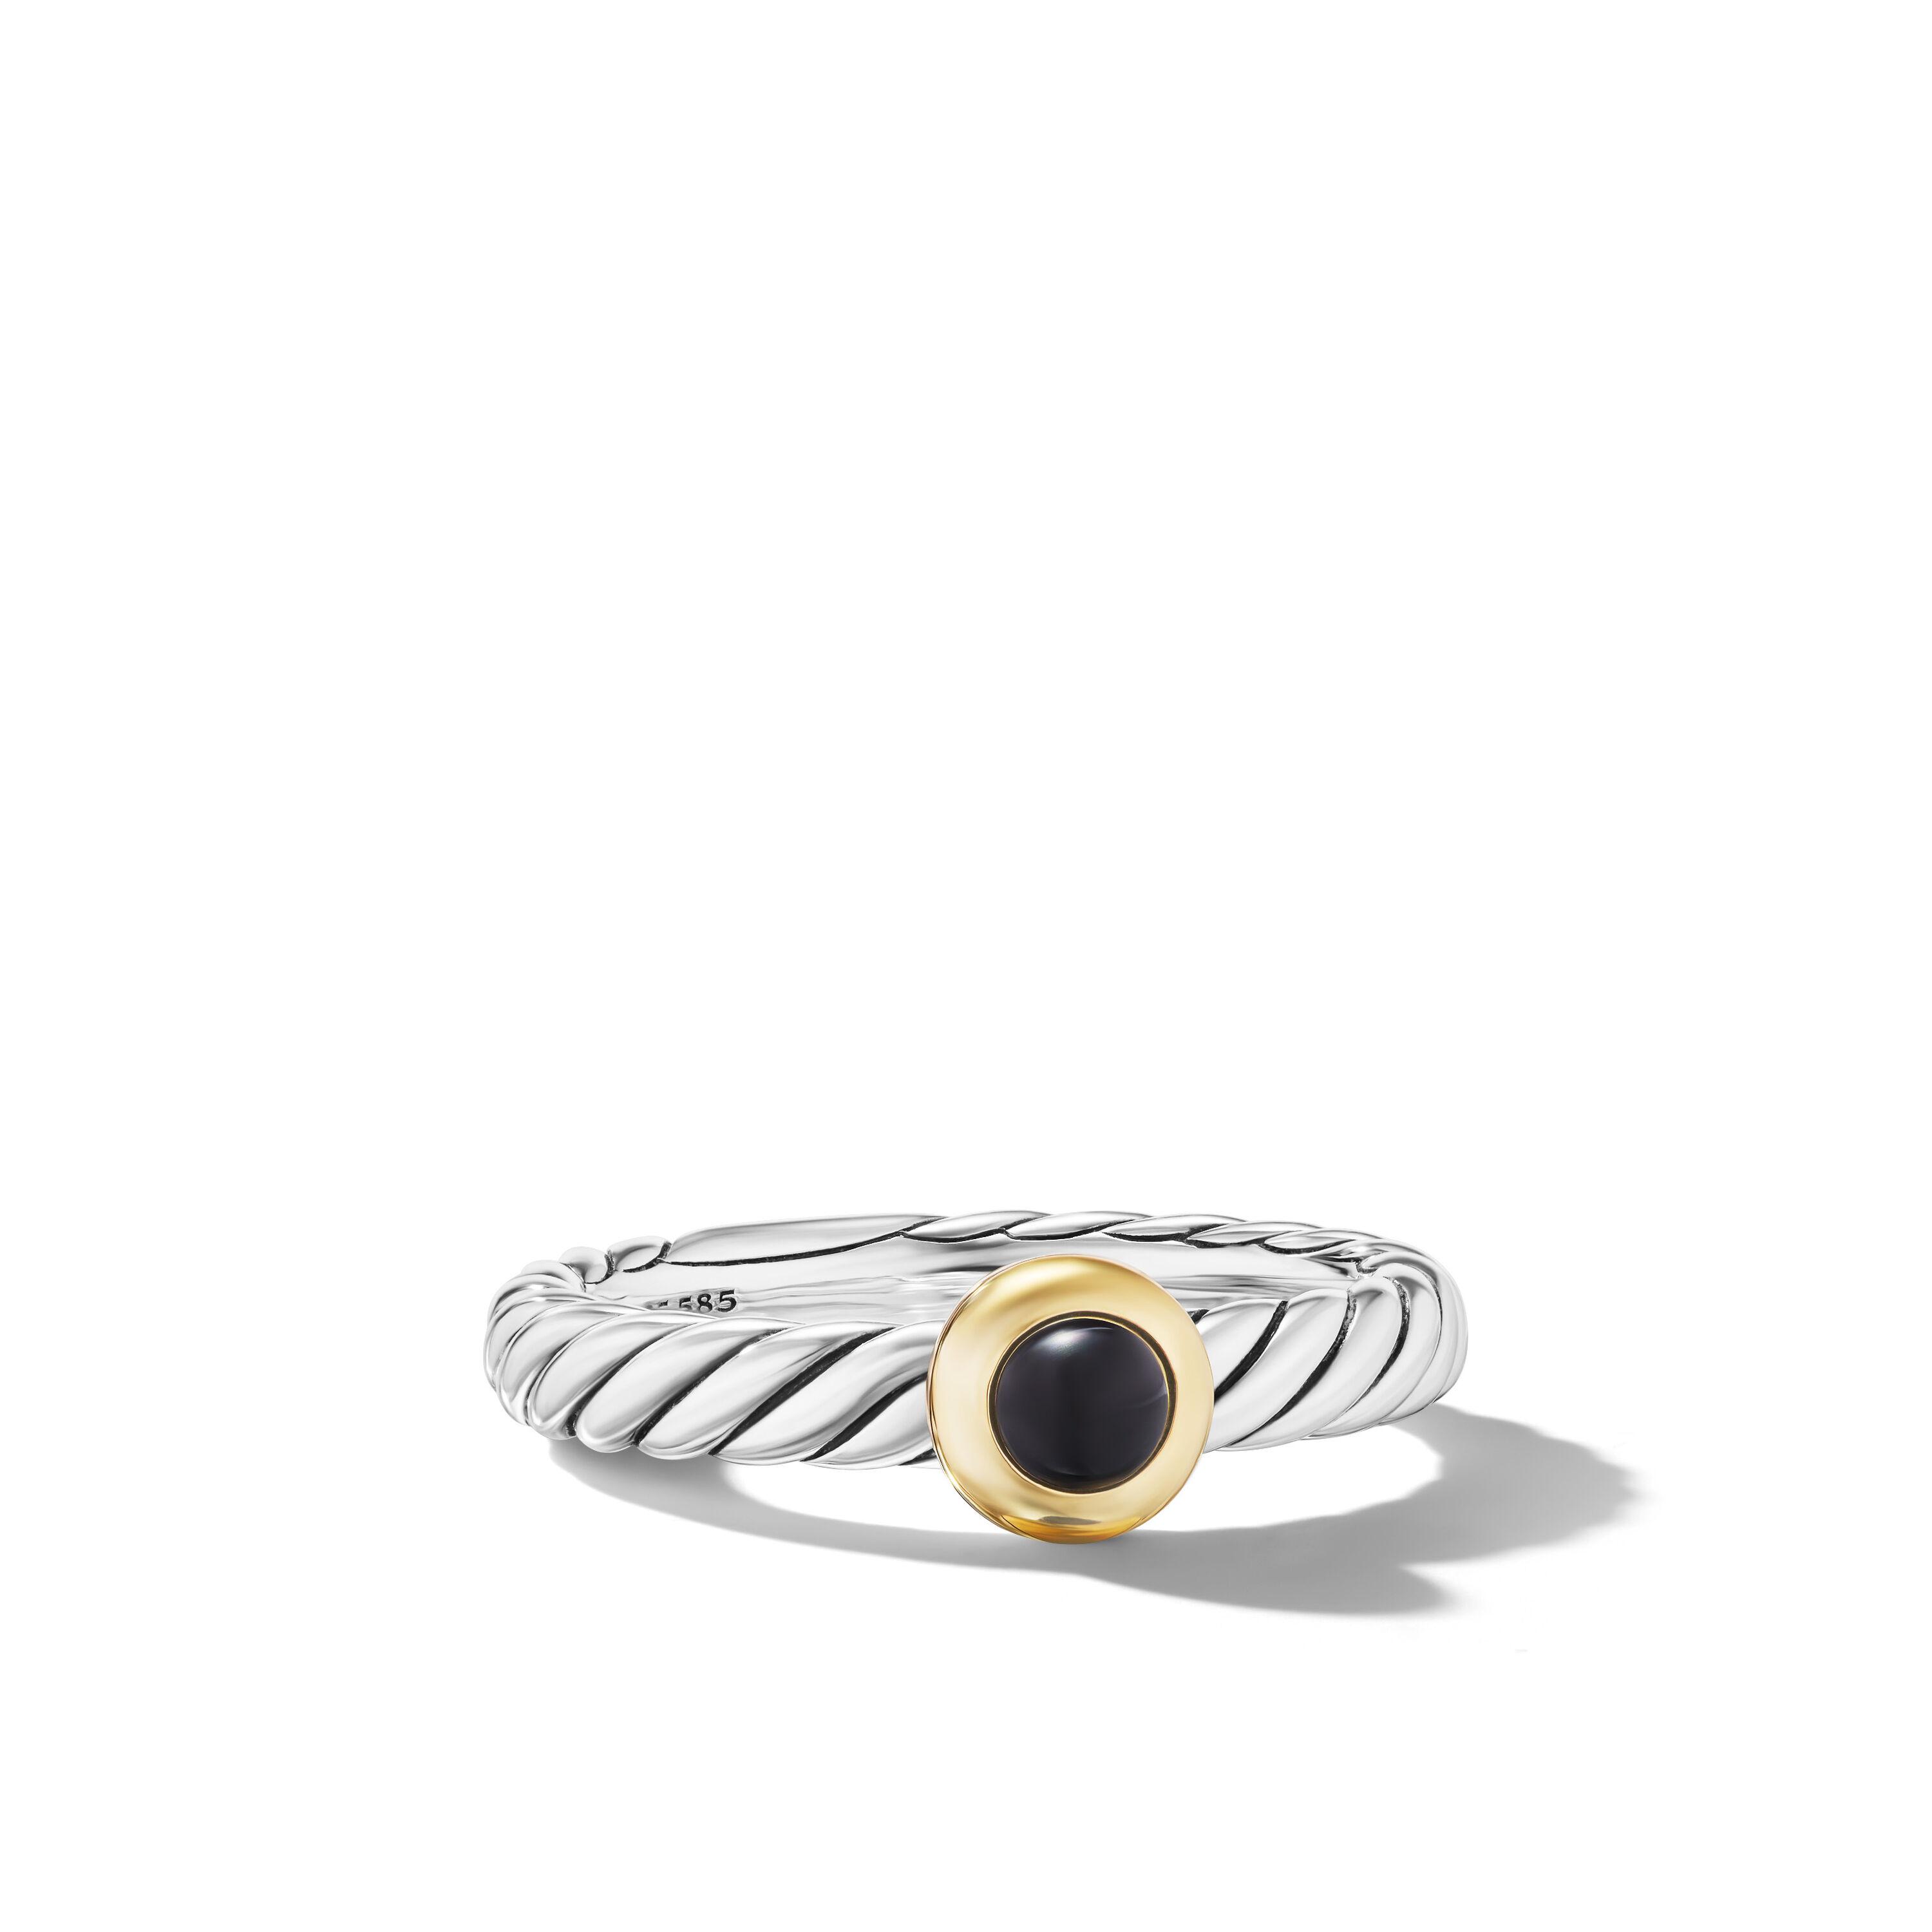 David Yurman Petite Cable Ring in Sterling Silver with 14K Yellow Gold and Black Onyx, Size 6